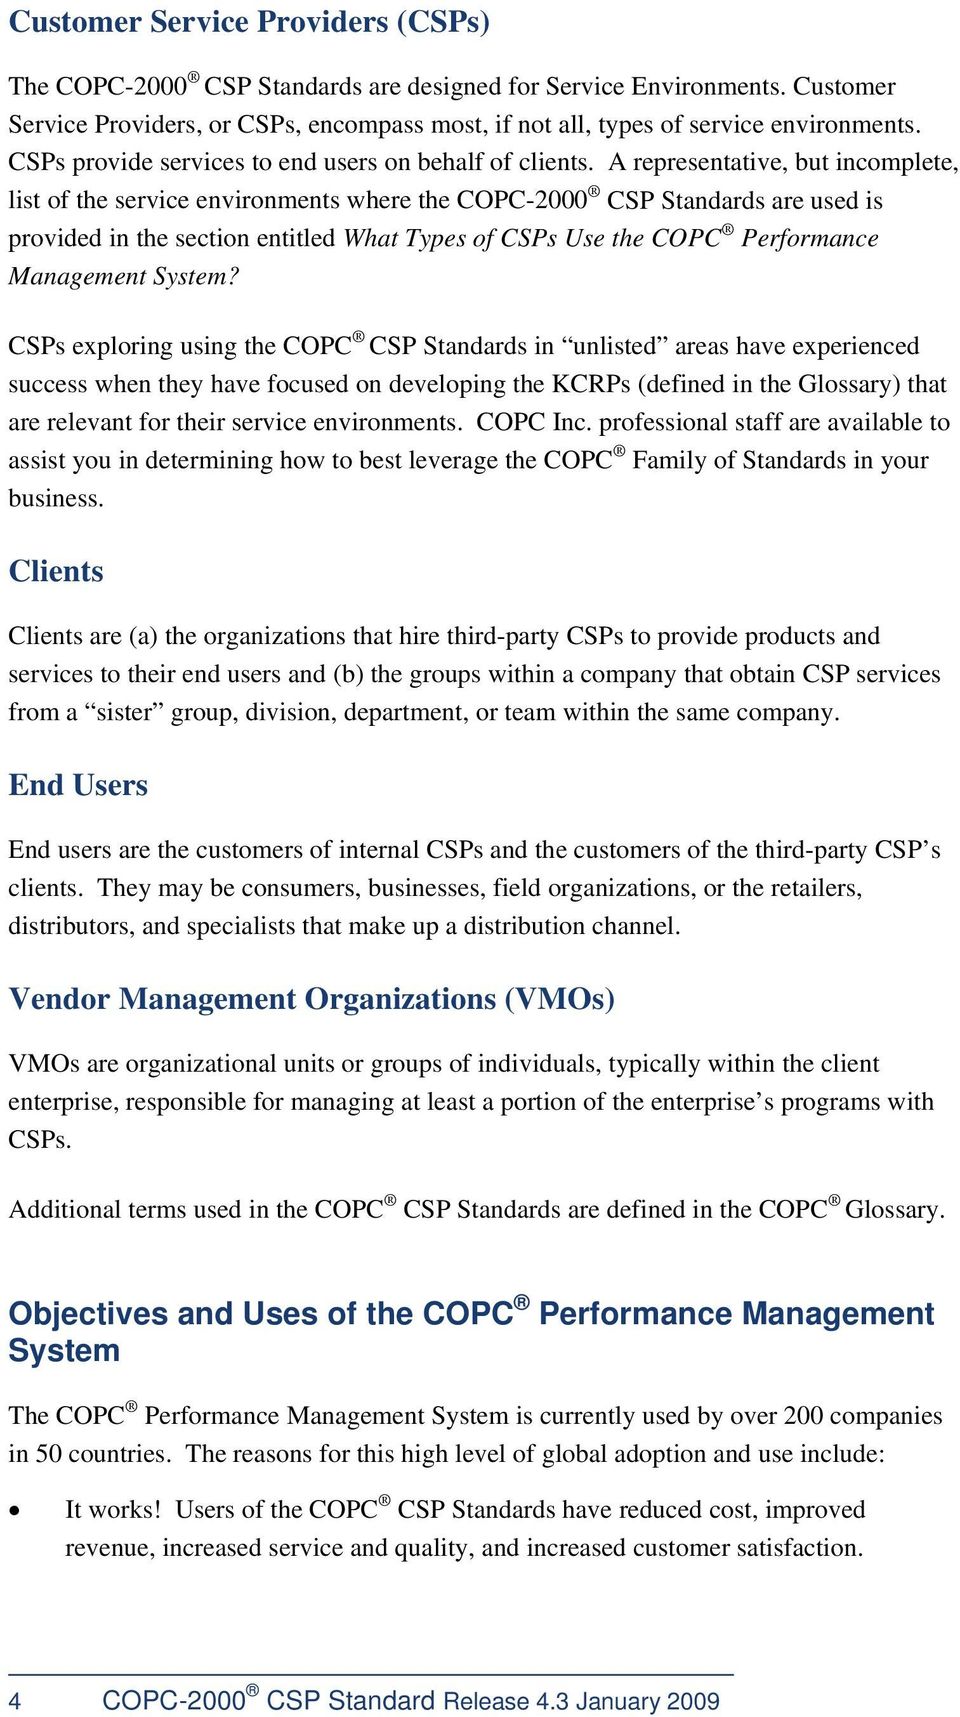 A representative, but incomplete, list of the service environments where the COPC-2000 CSP Standards are used is provided in the section entitled What Types of CSPs Use the COPC Performance